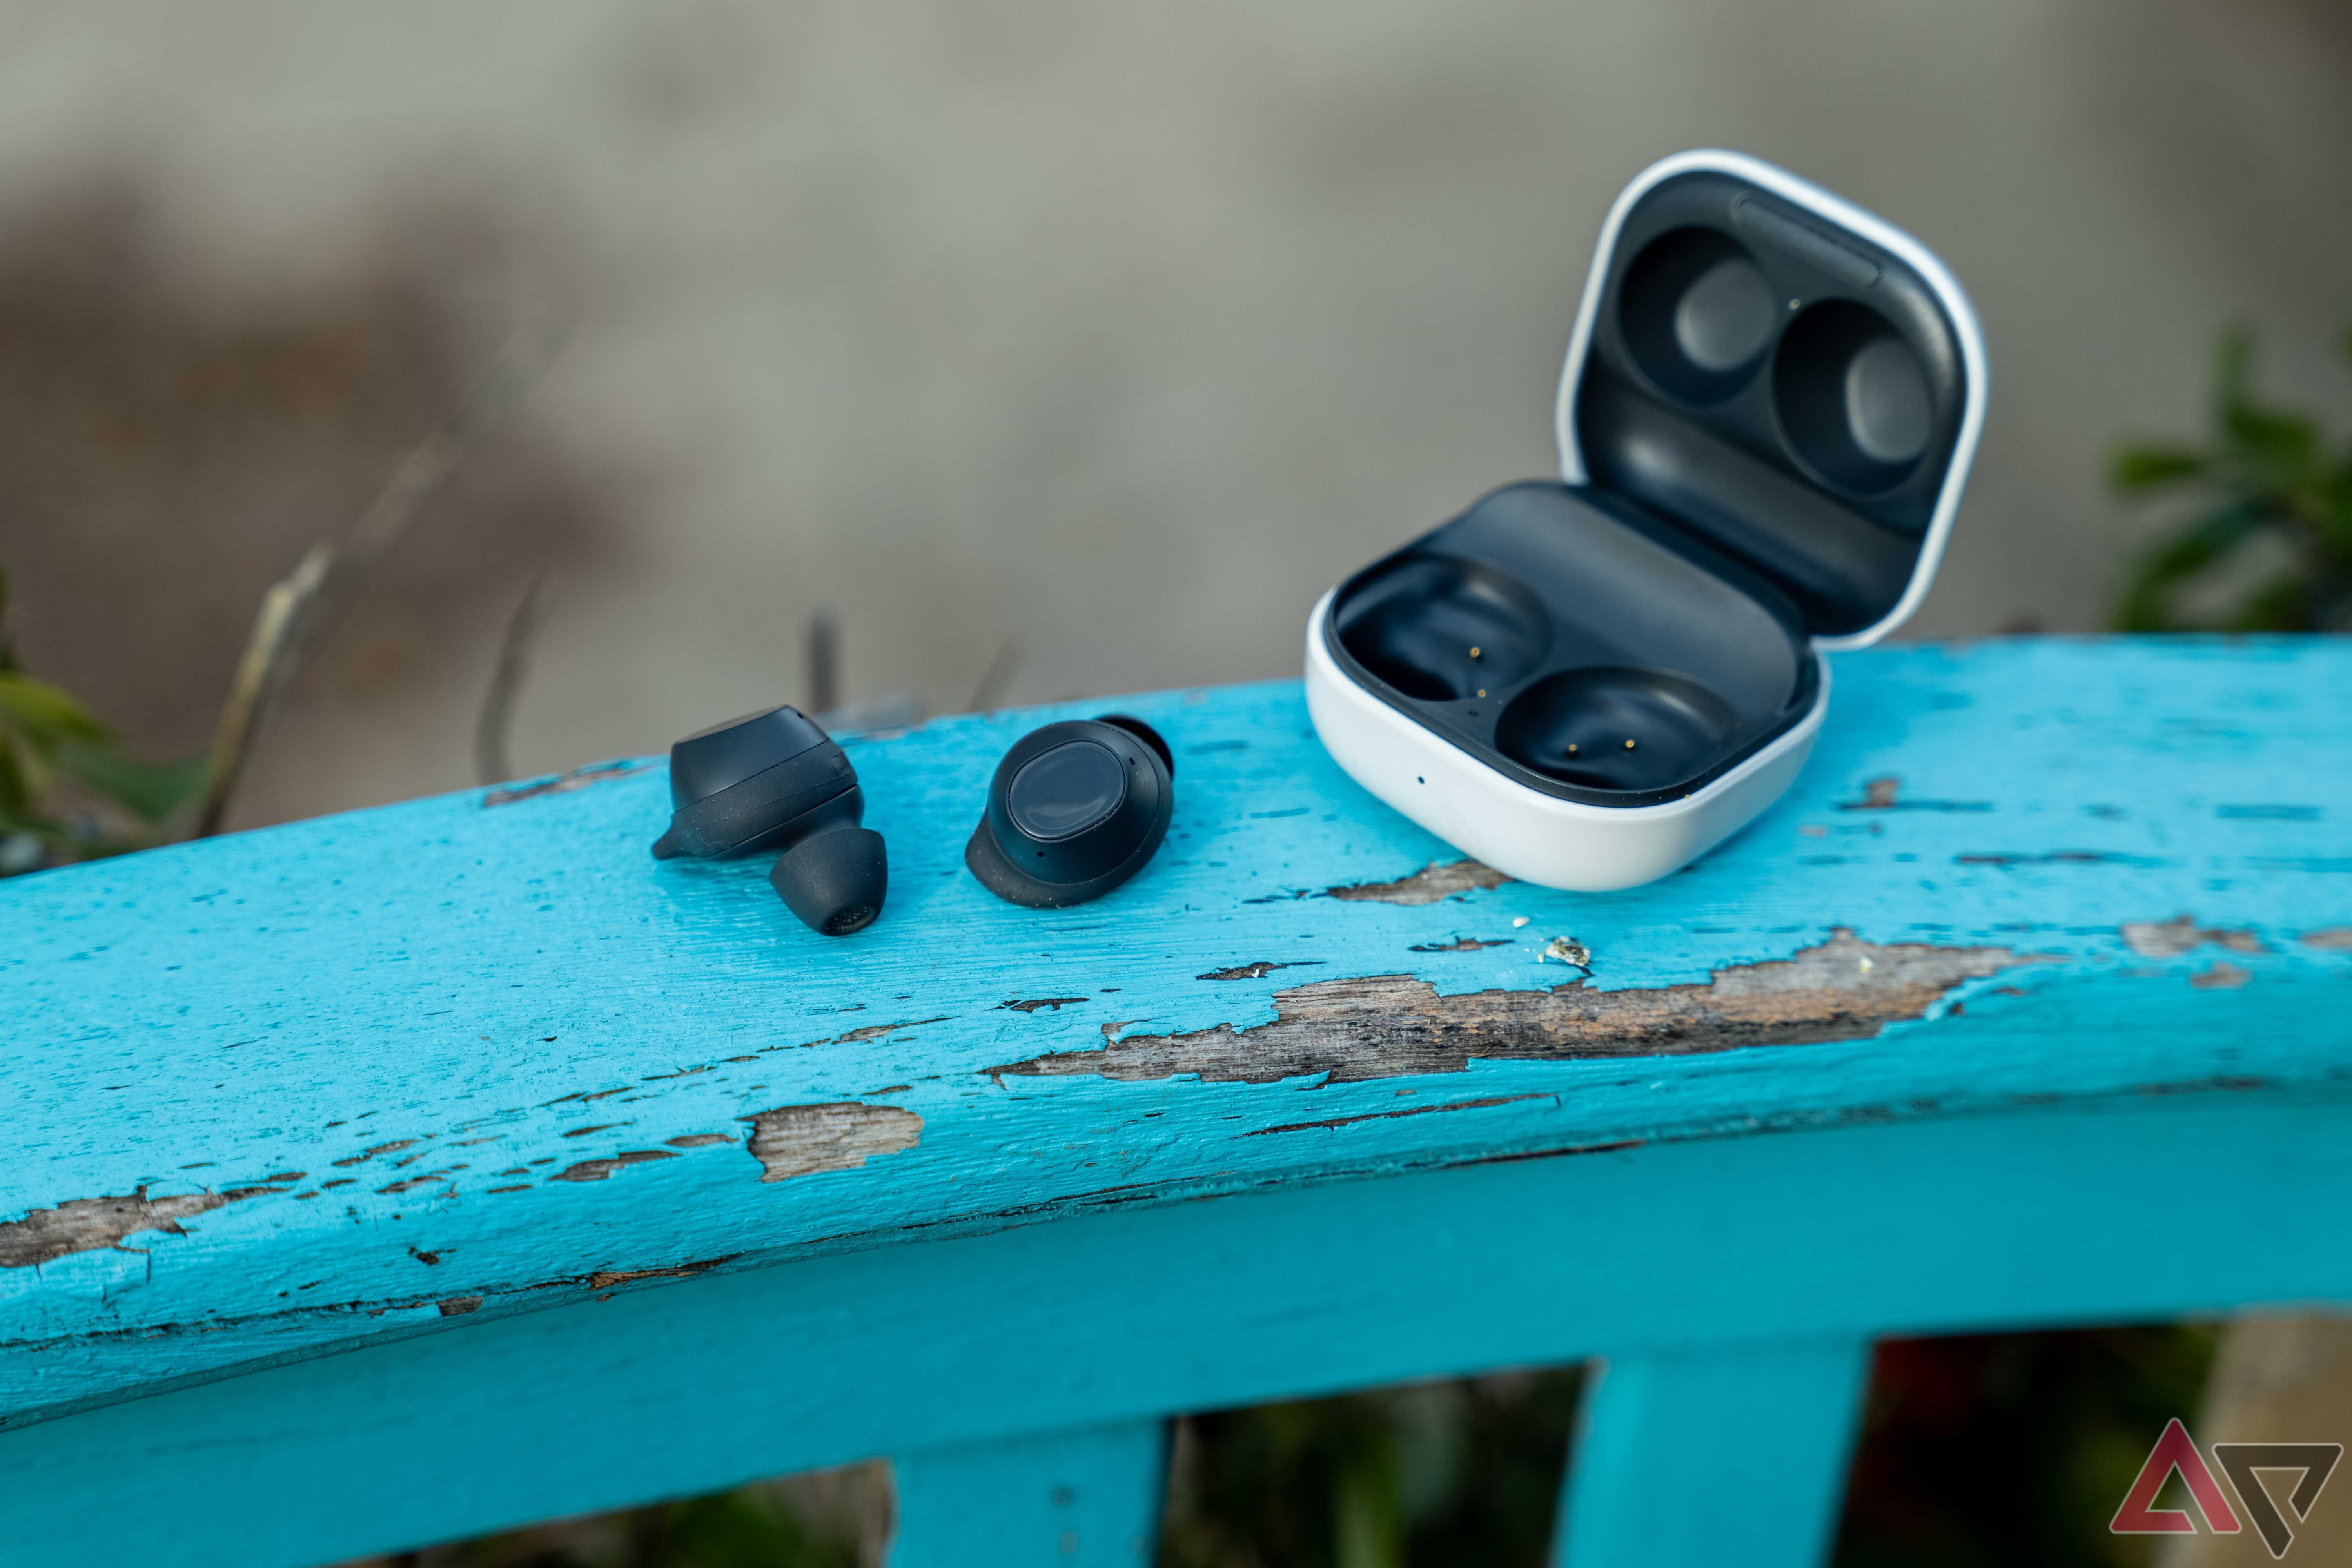 The Galaxy Buds FE out of the open case on a blue rail